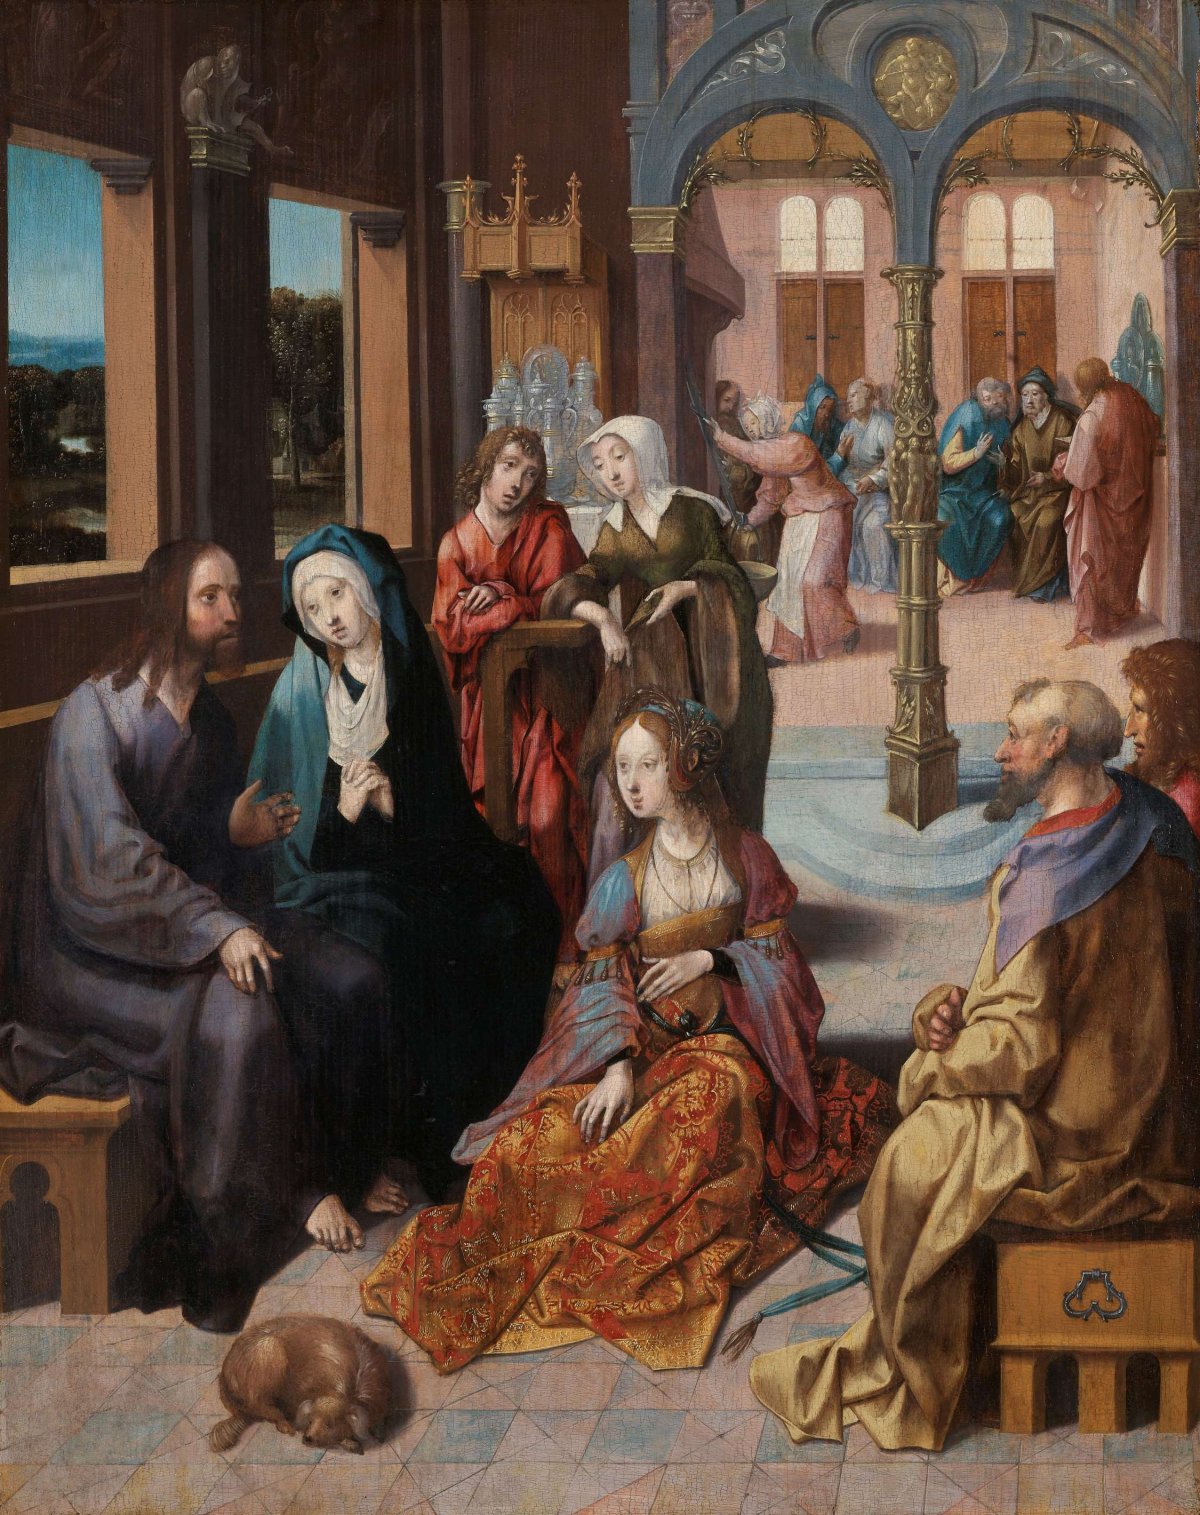 Christ’s Second Visit to the House of Mary and Martha, Cornelis Engebrechtsz, c. 1515 - c. 1520